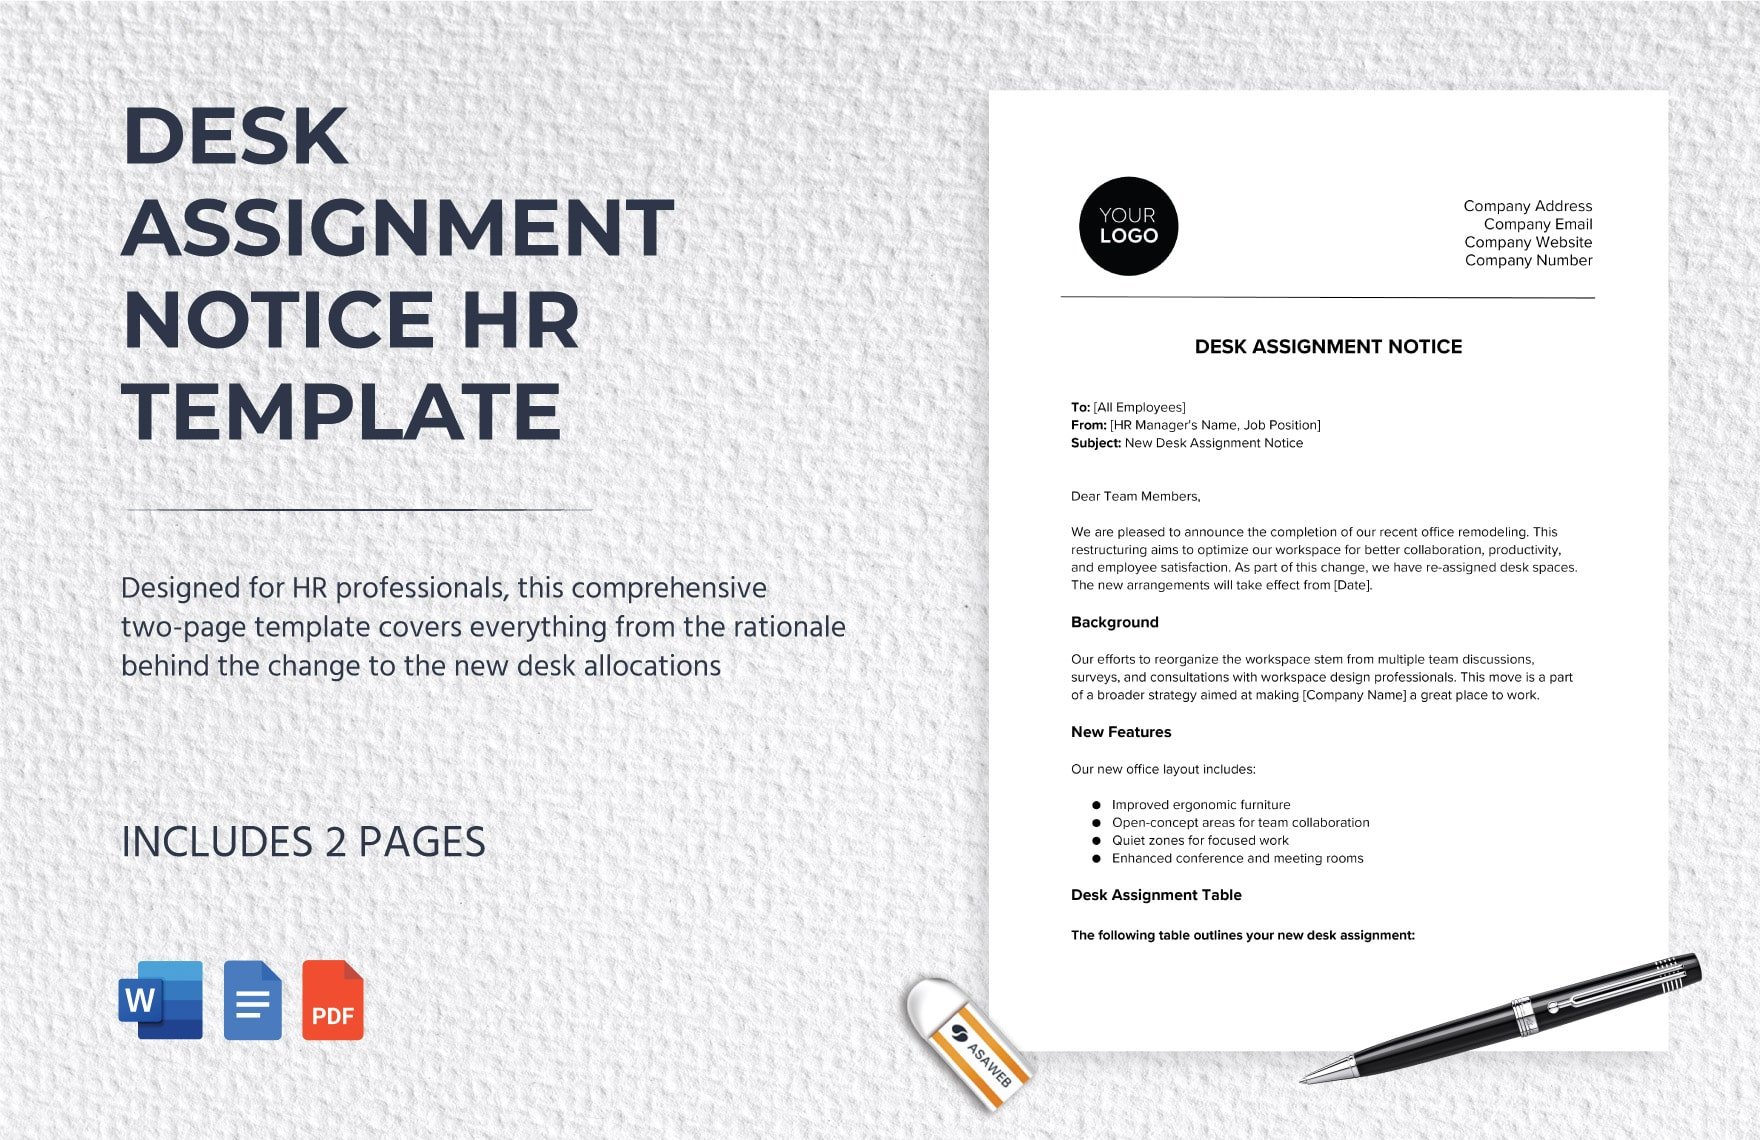 Desk Assignment Notice HR Template in Word, Google Docs, PDF